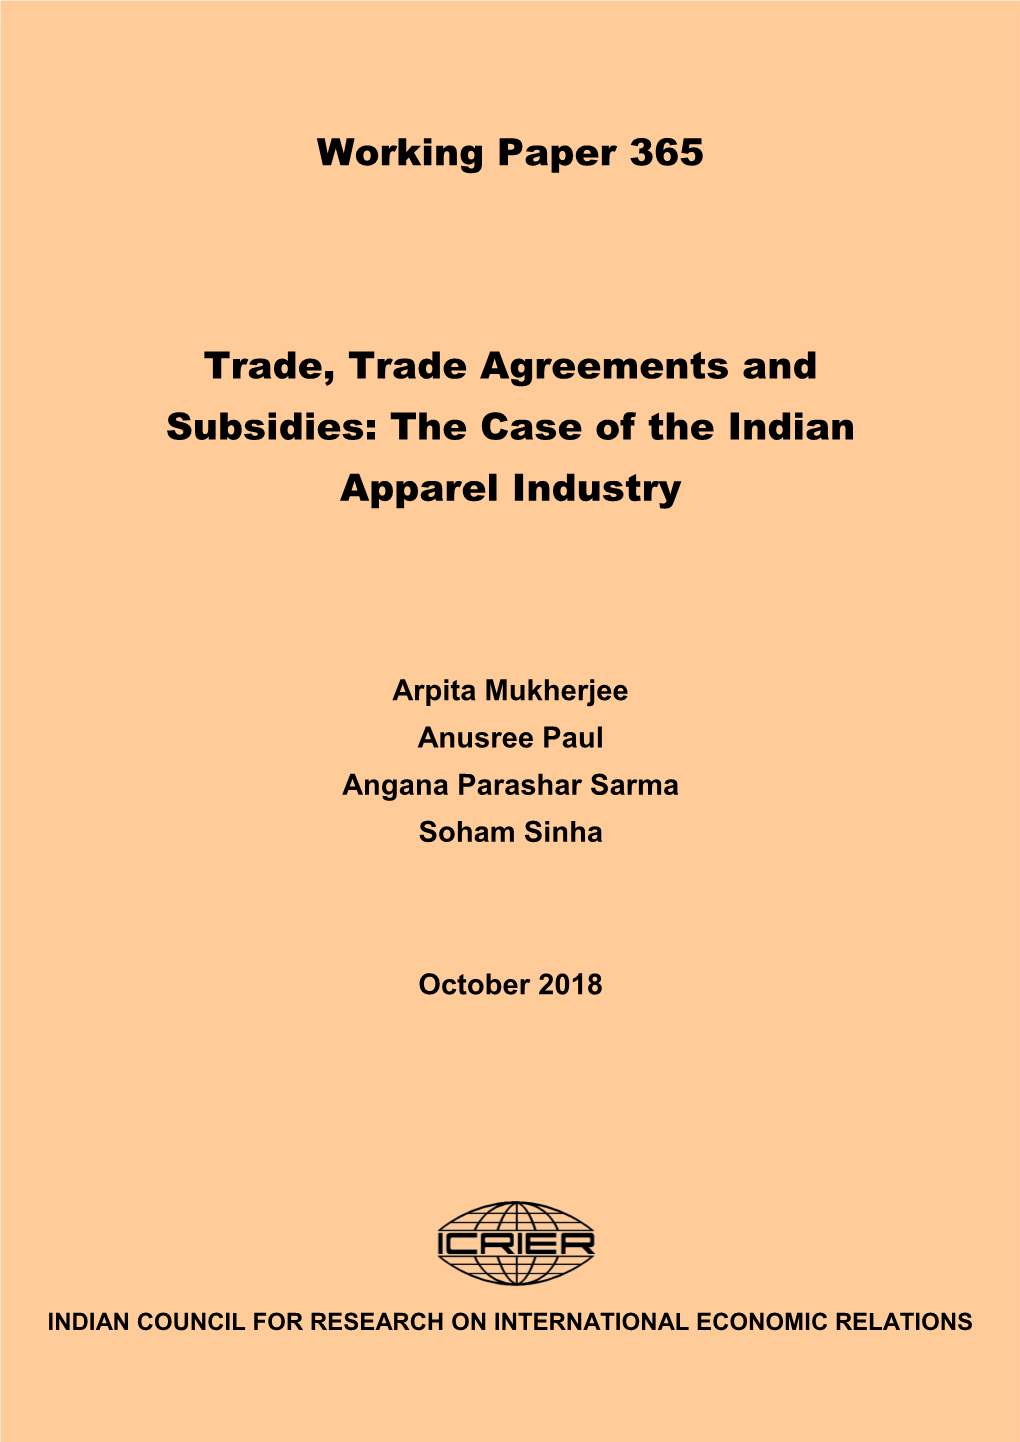 Trade, Trade Agreements and Subsidies: the Case of the Indian Apparel Industry